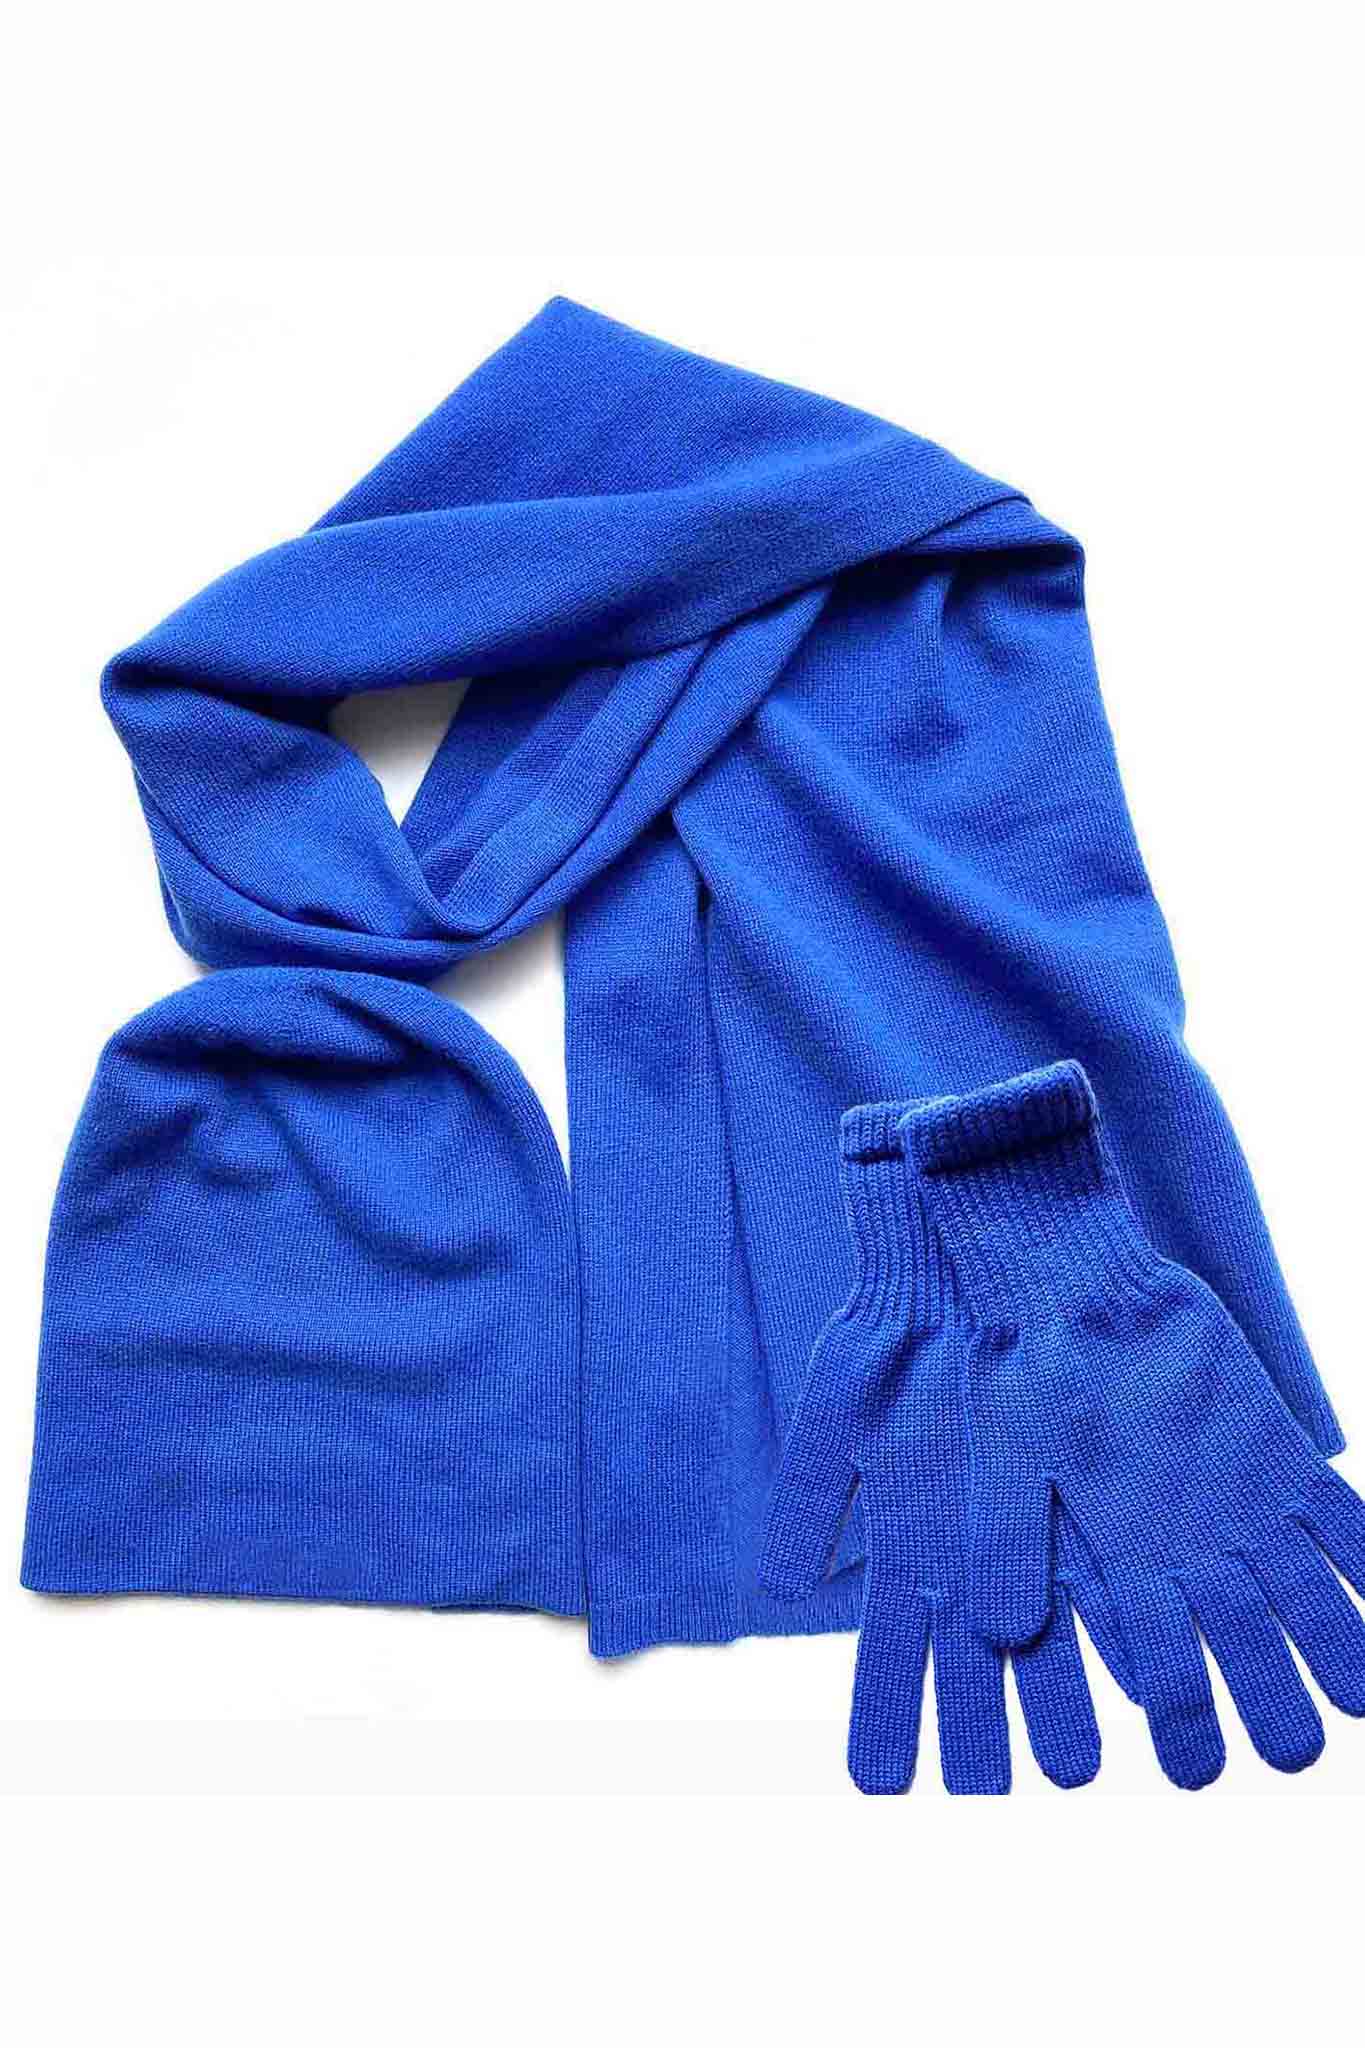 Cashmere hat, scarf and gloves set in Royal blue